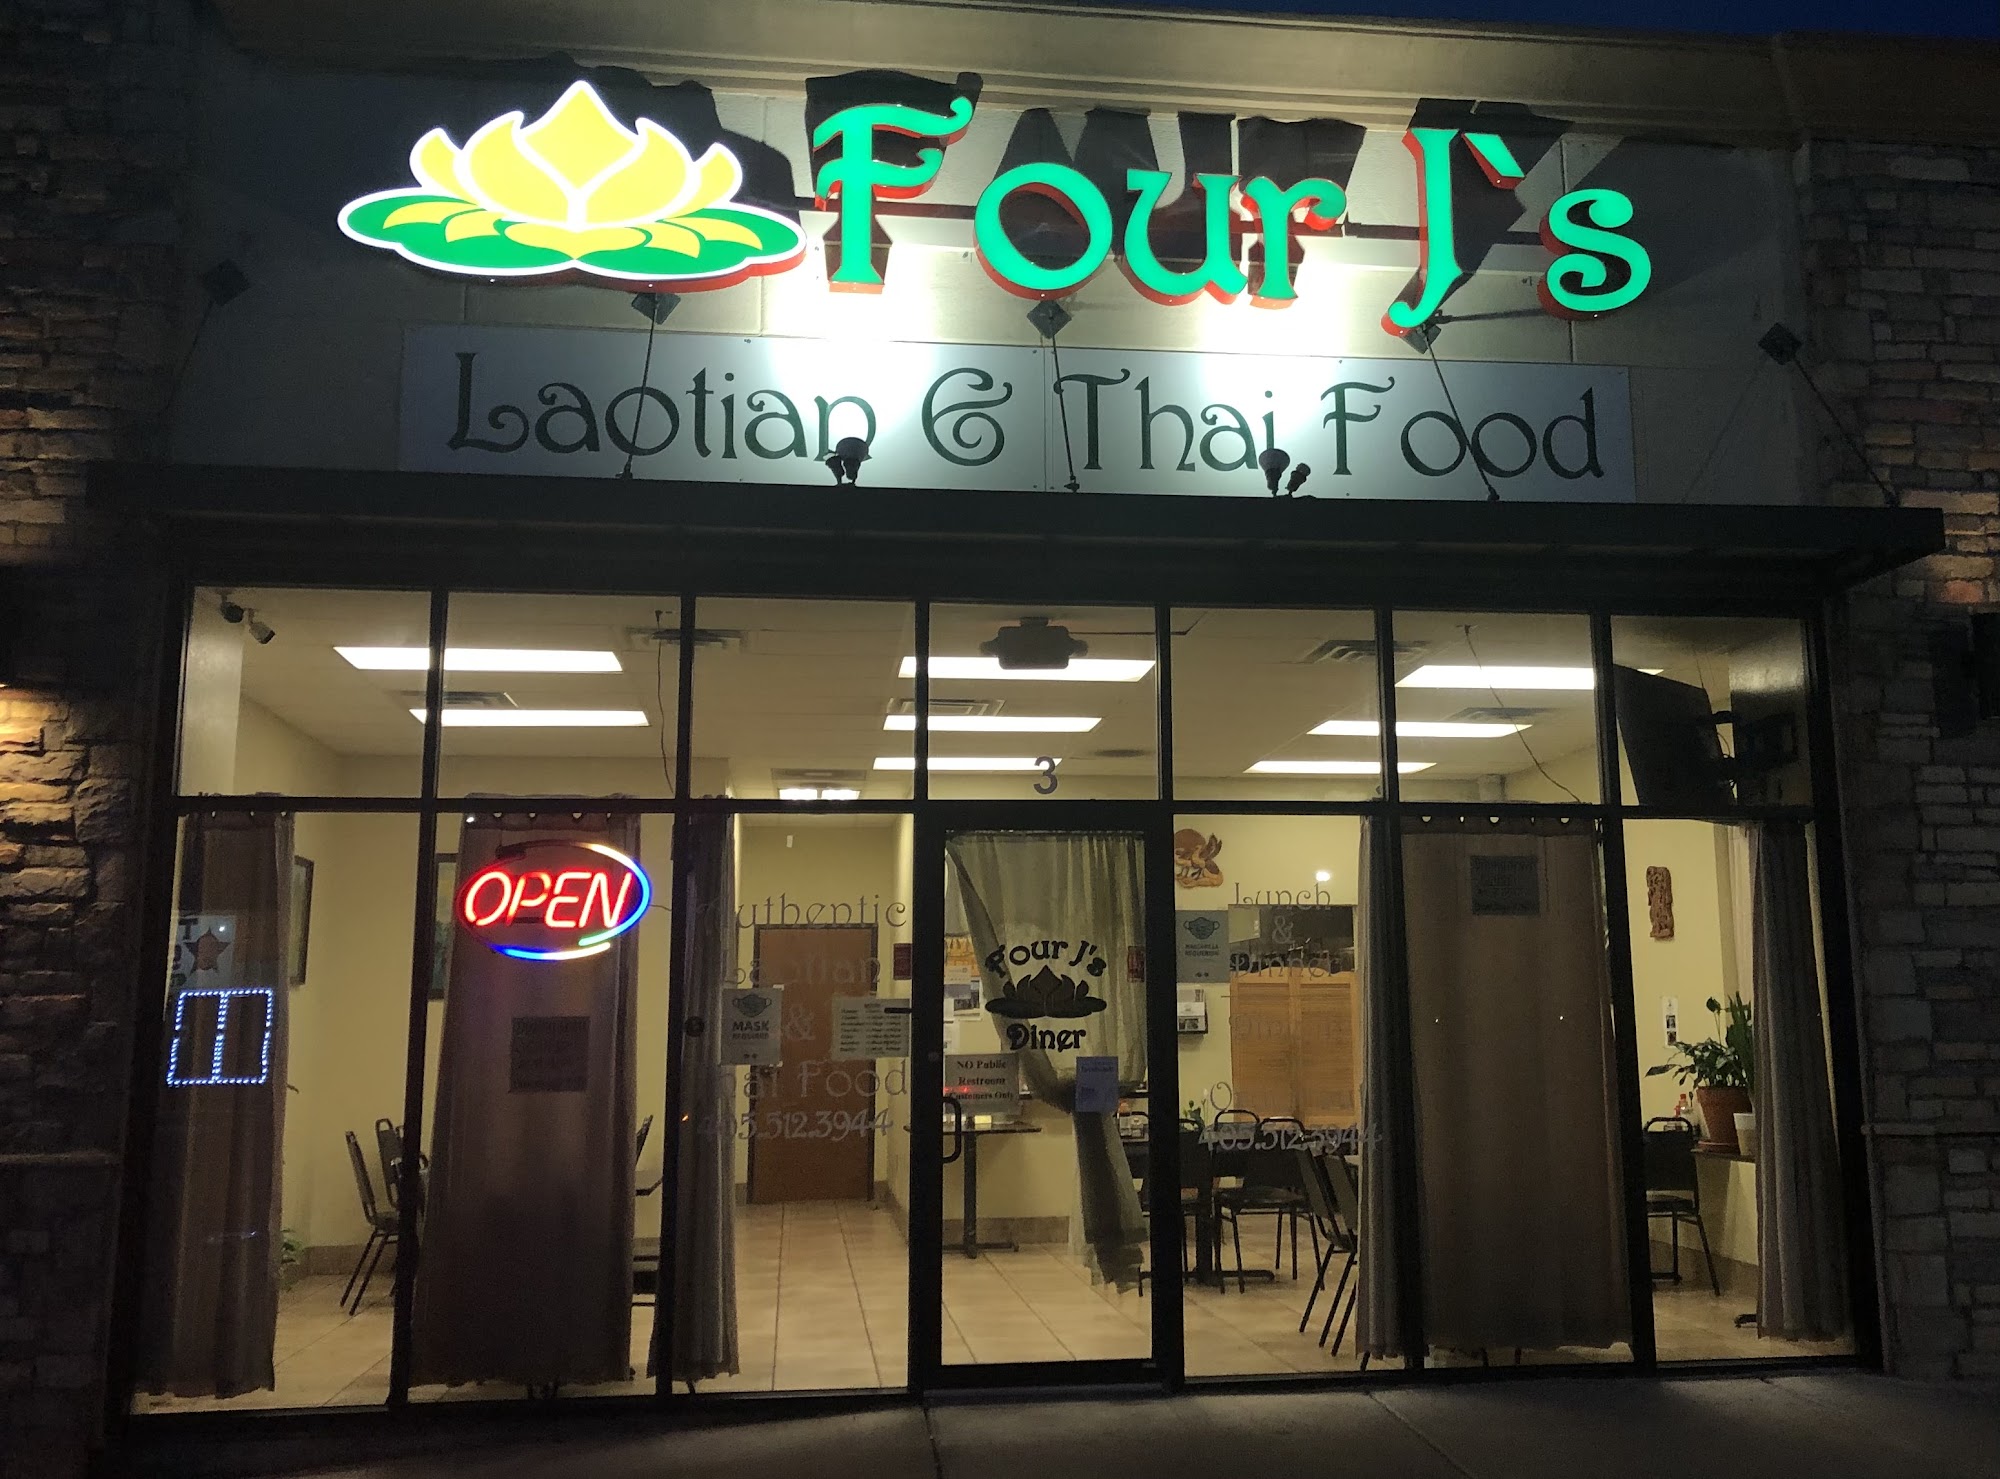 Four J's (Lao/Thai Dine-In From Togo Boxes or Takeout)